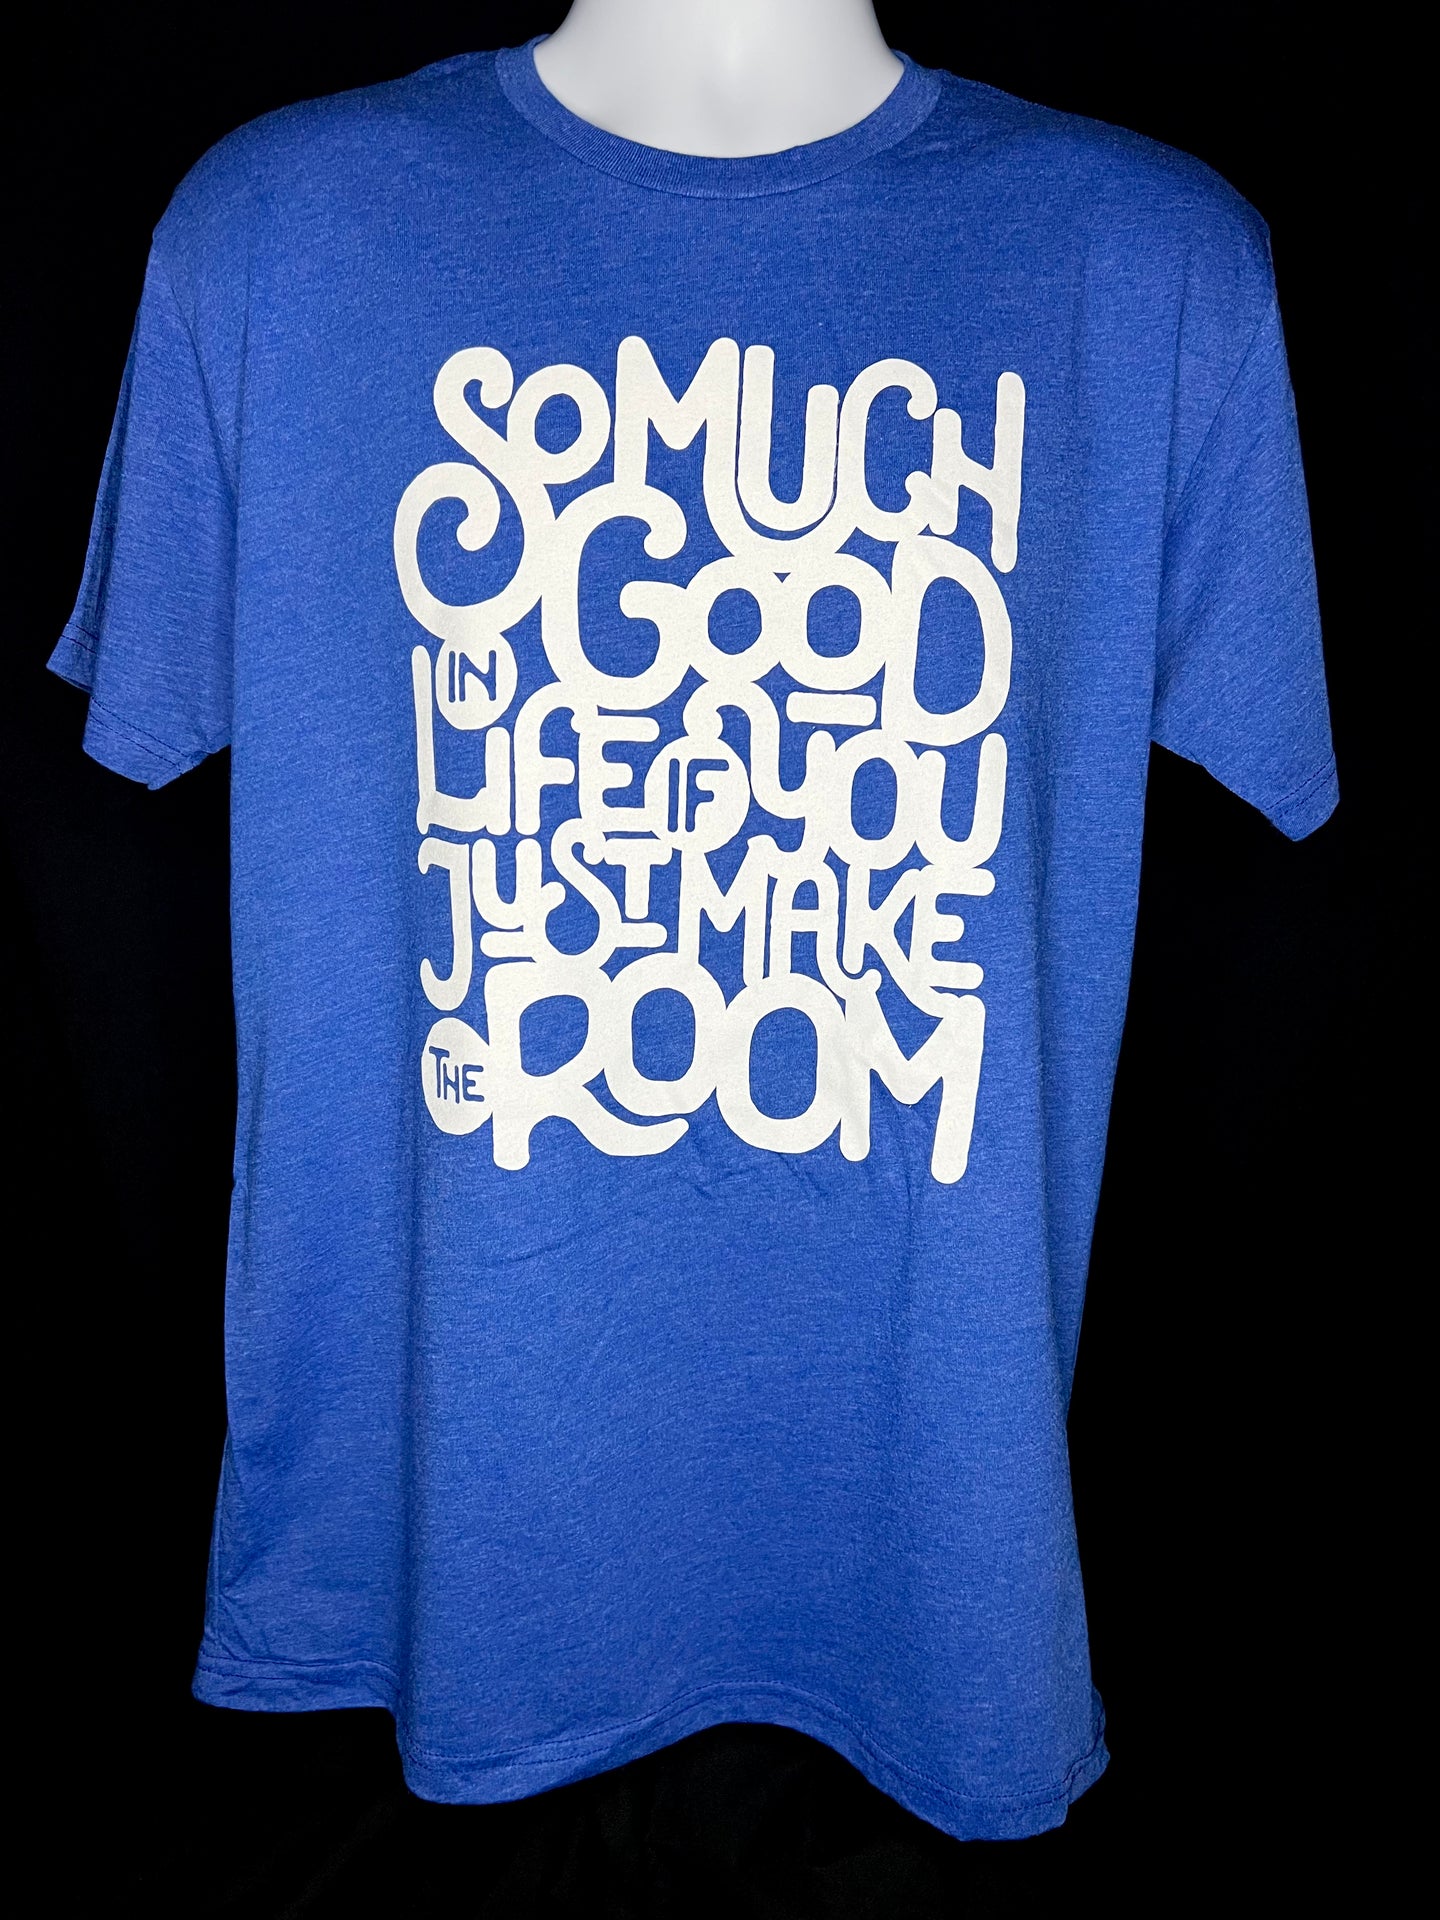 So Much Good In Life If You Just Make The Room - Royal Blue T-Shirt (Unisex)